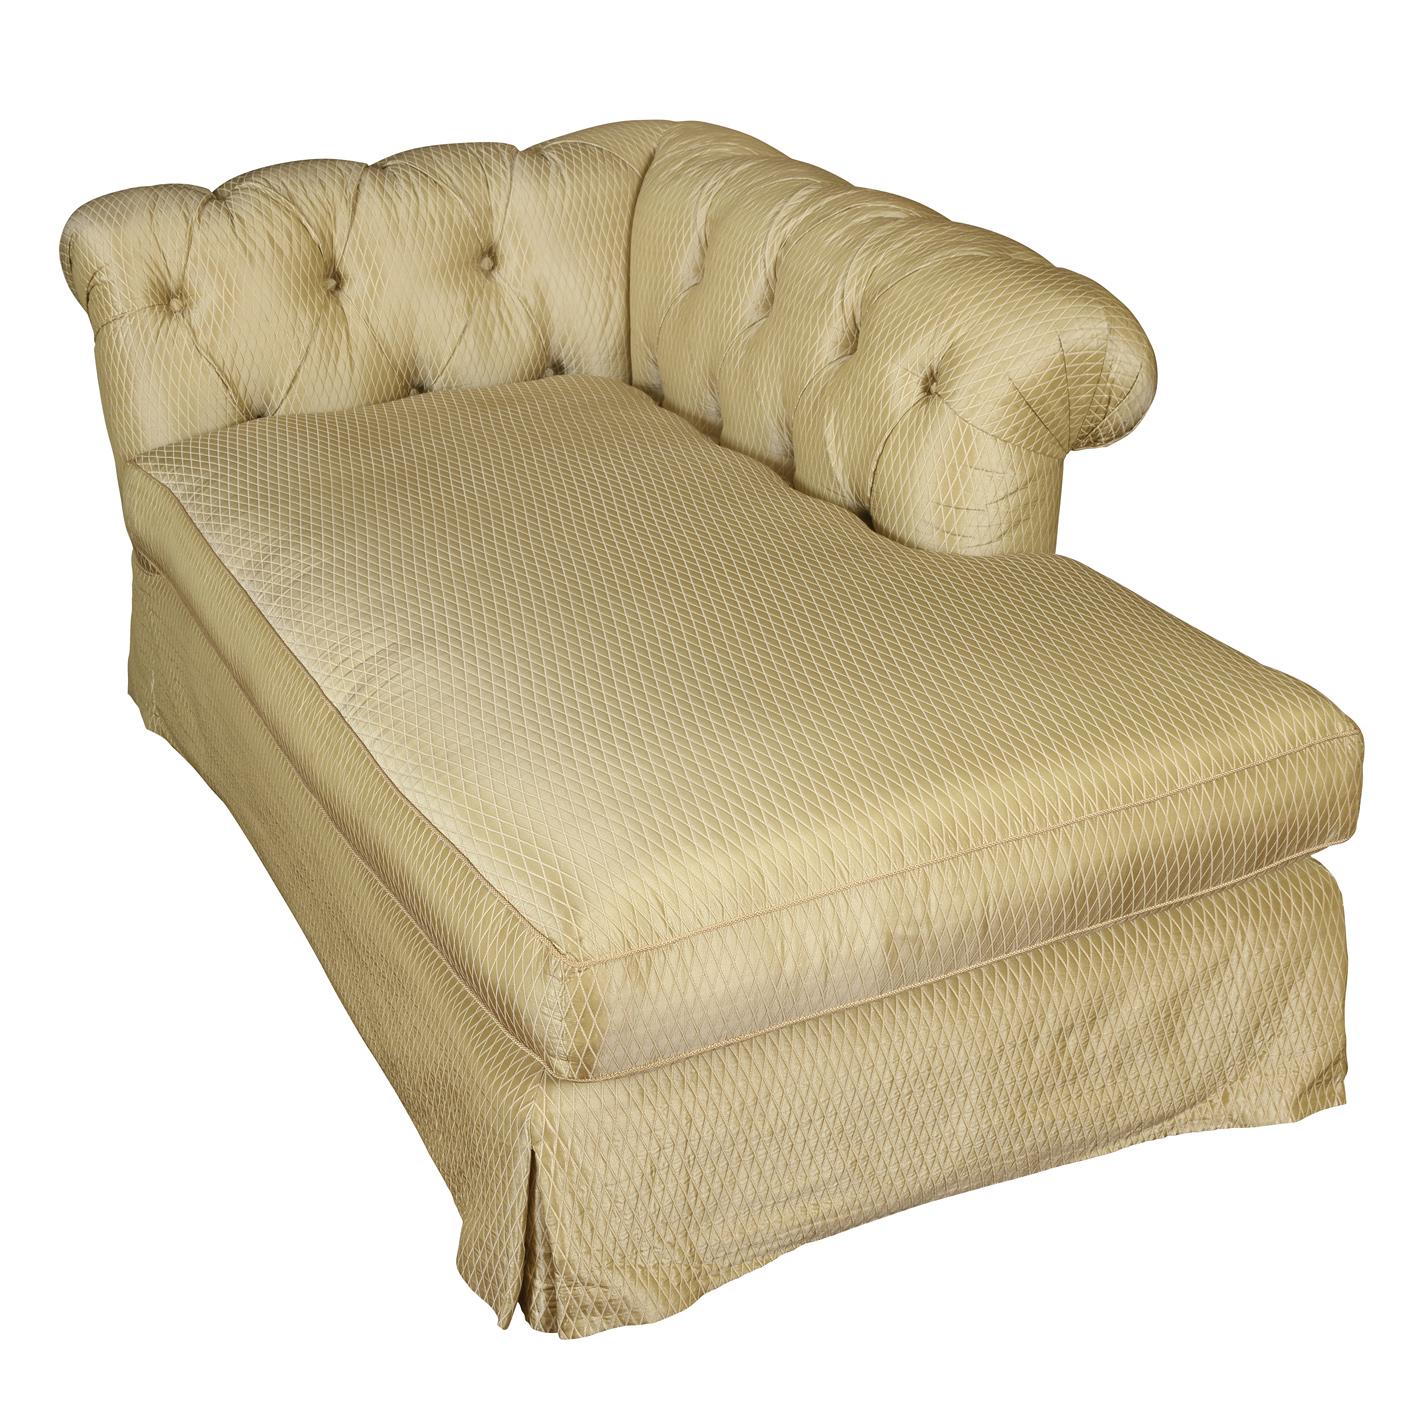 20th Century English Tufted Upholstered Chaise